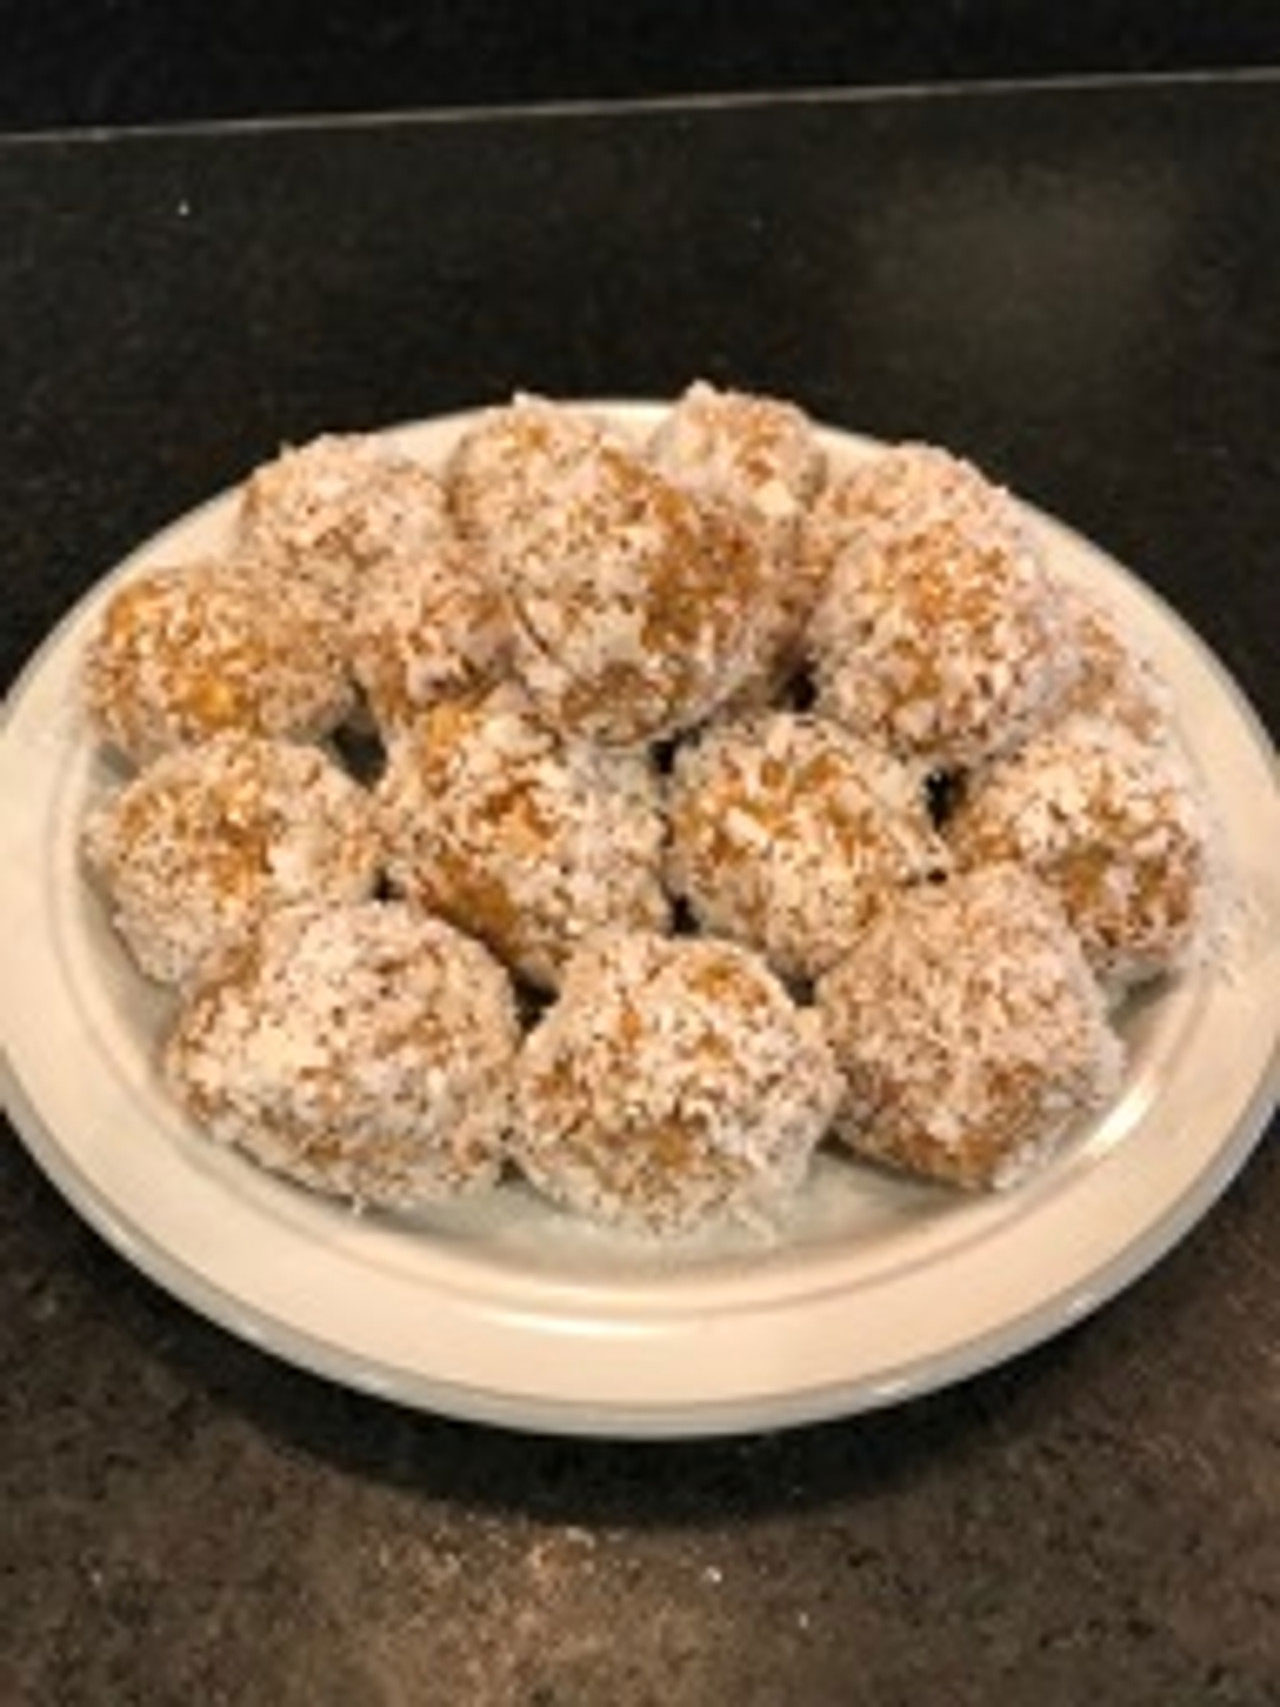 A plate stacked with no-bake Tosteds energy balls.